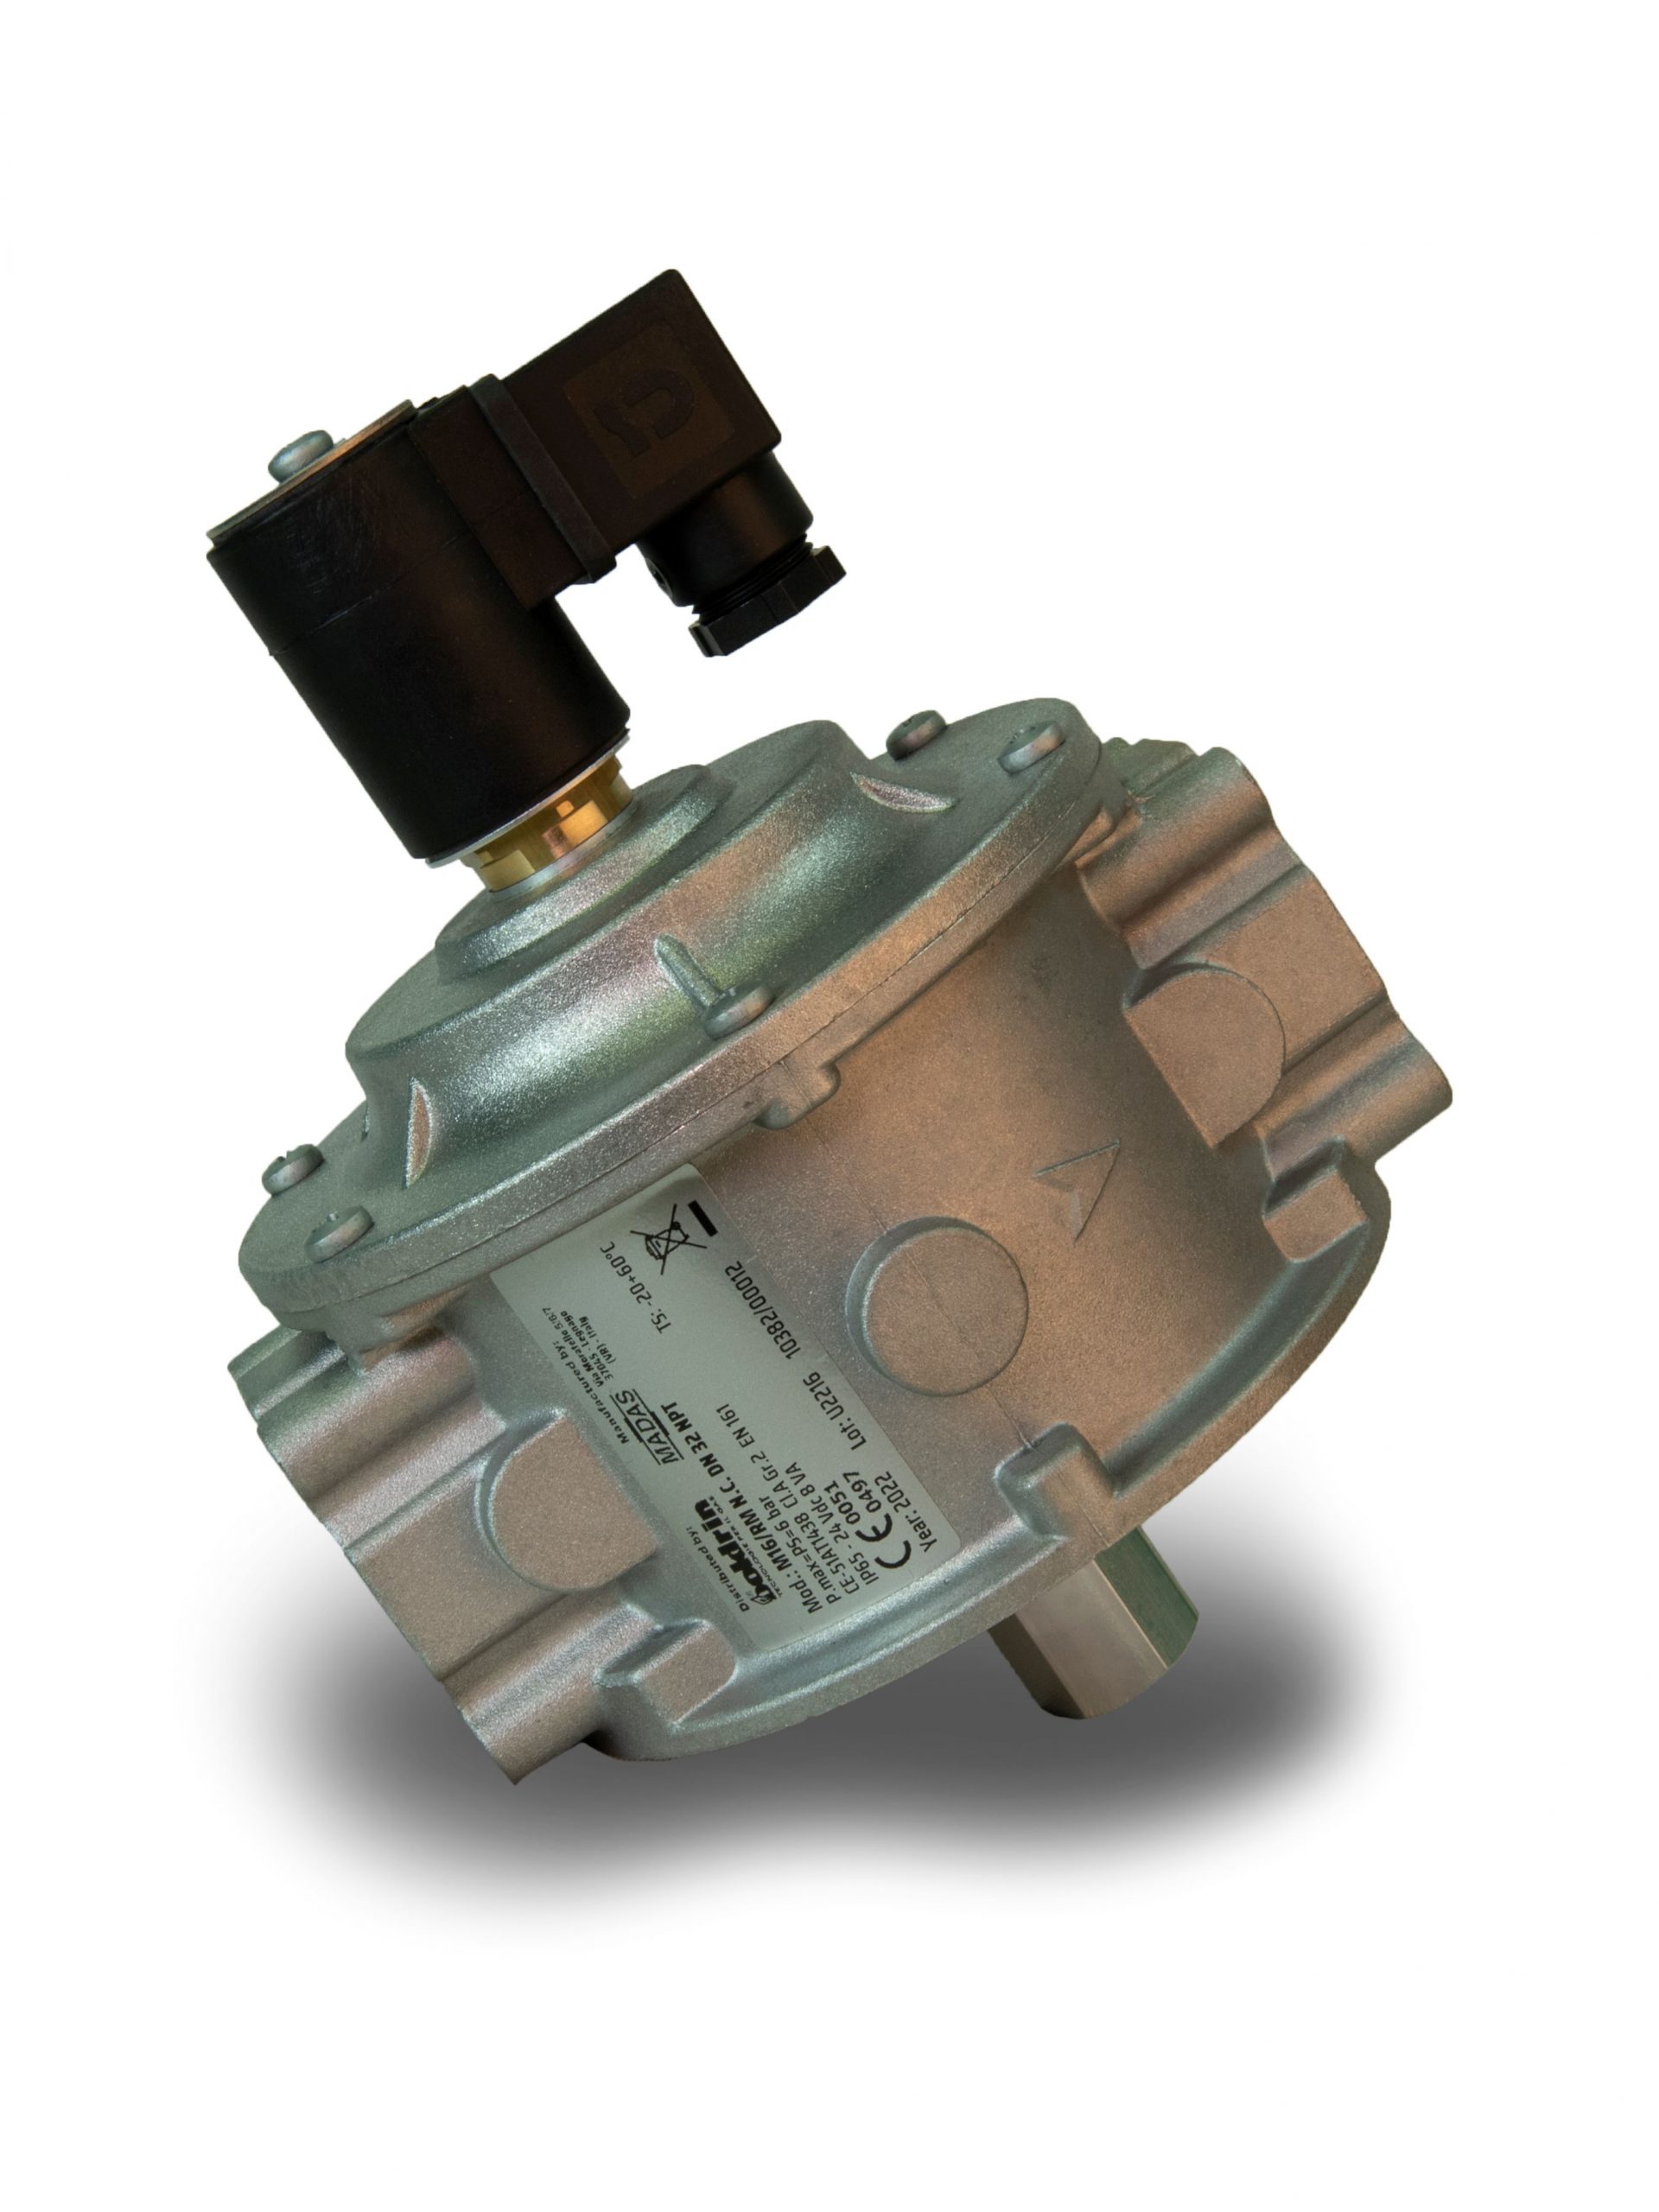 SOLENOID VALVE 1 1/4 Inches 24V DC NORMALLY CLOSED 1-6 BAR from Gas Equipment Company Llc Abu Dhabi, UNITED ARAB EMIRATES